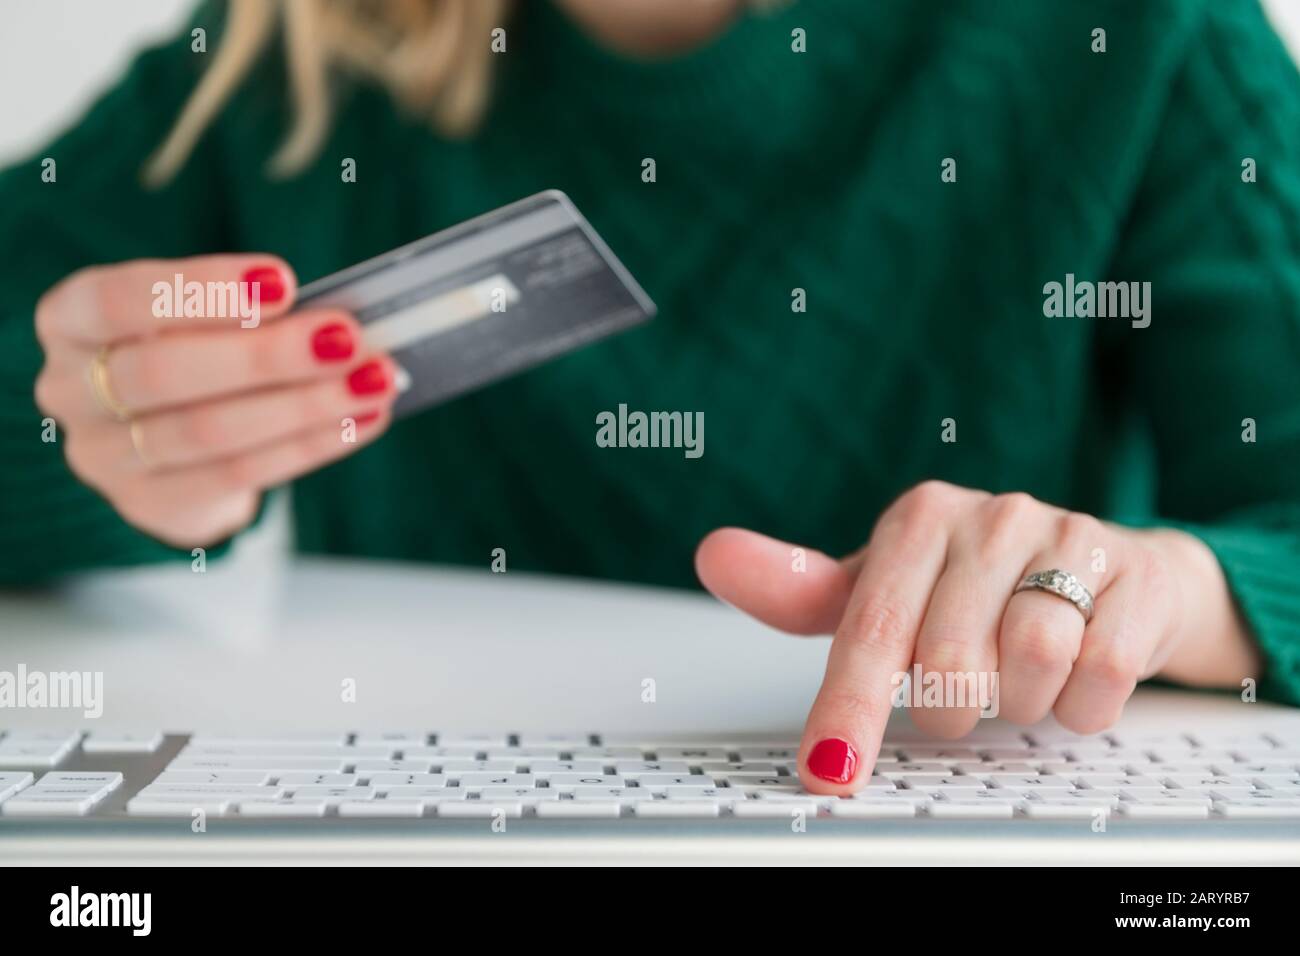 Woman holding credit card and typing on keyboard Stock Photo